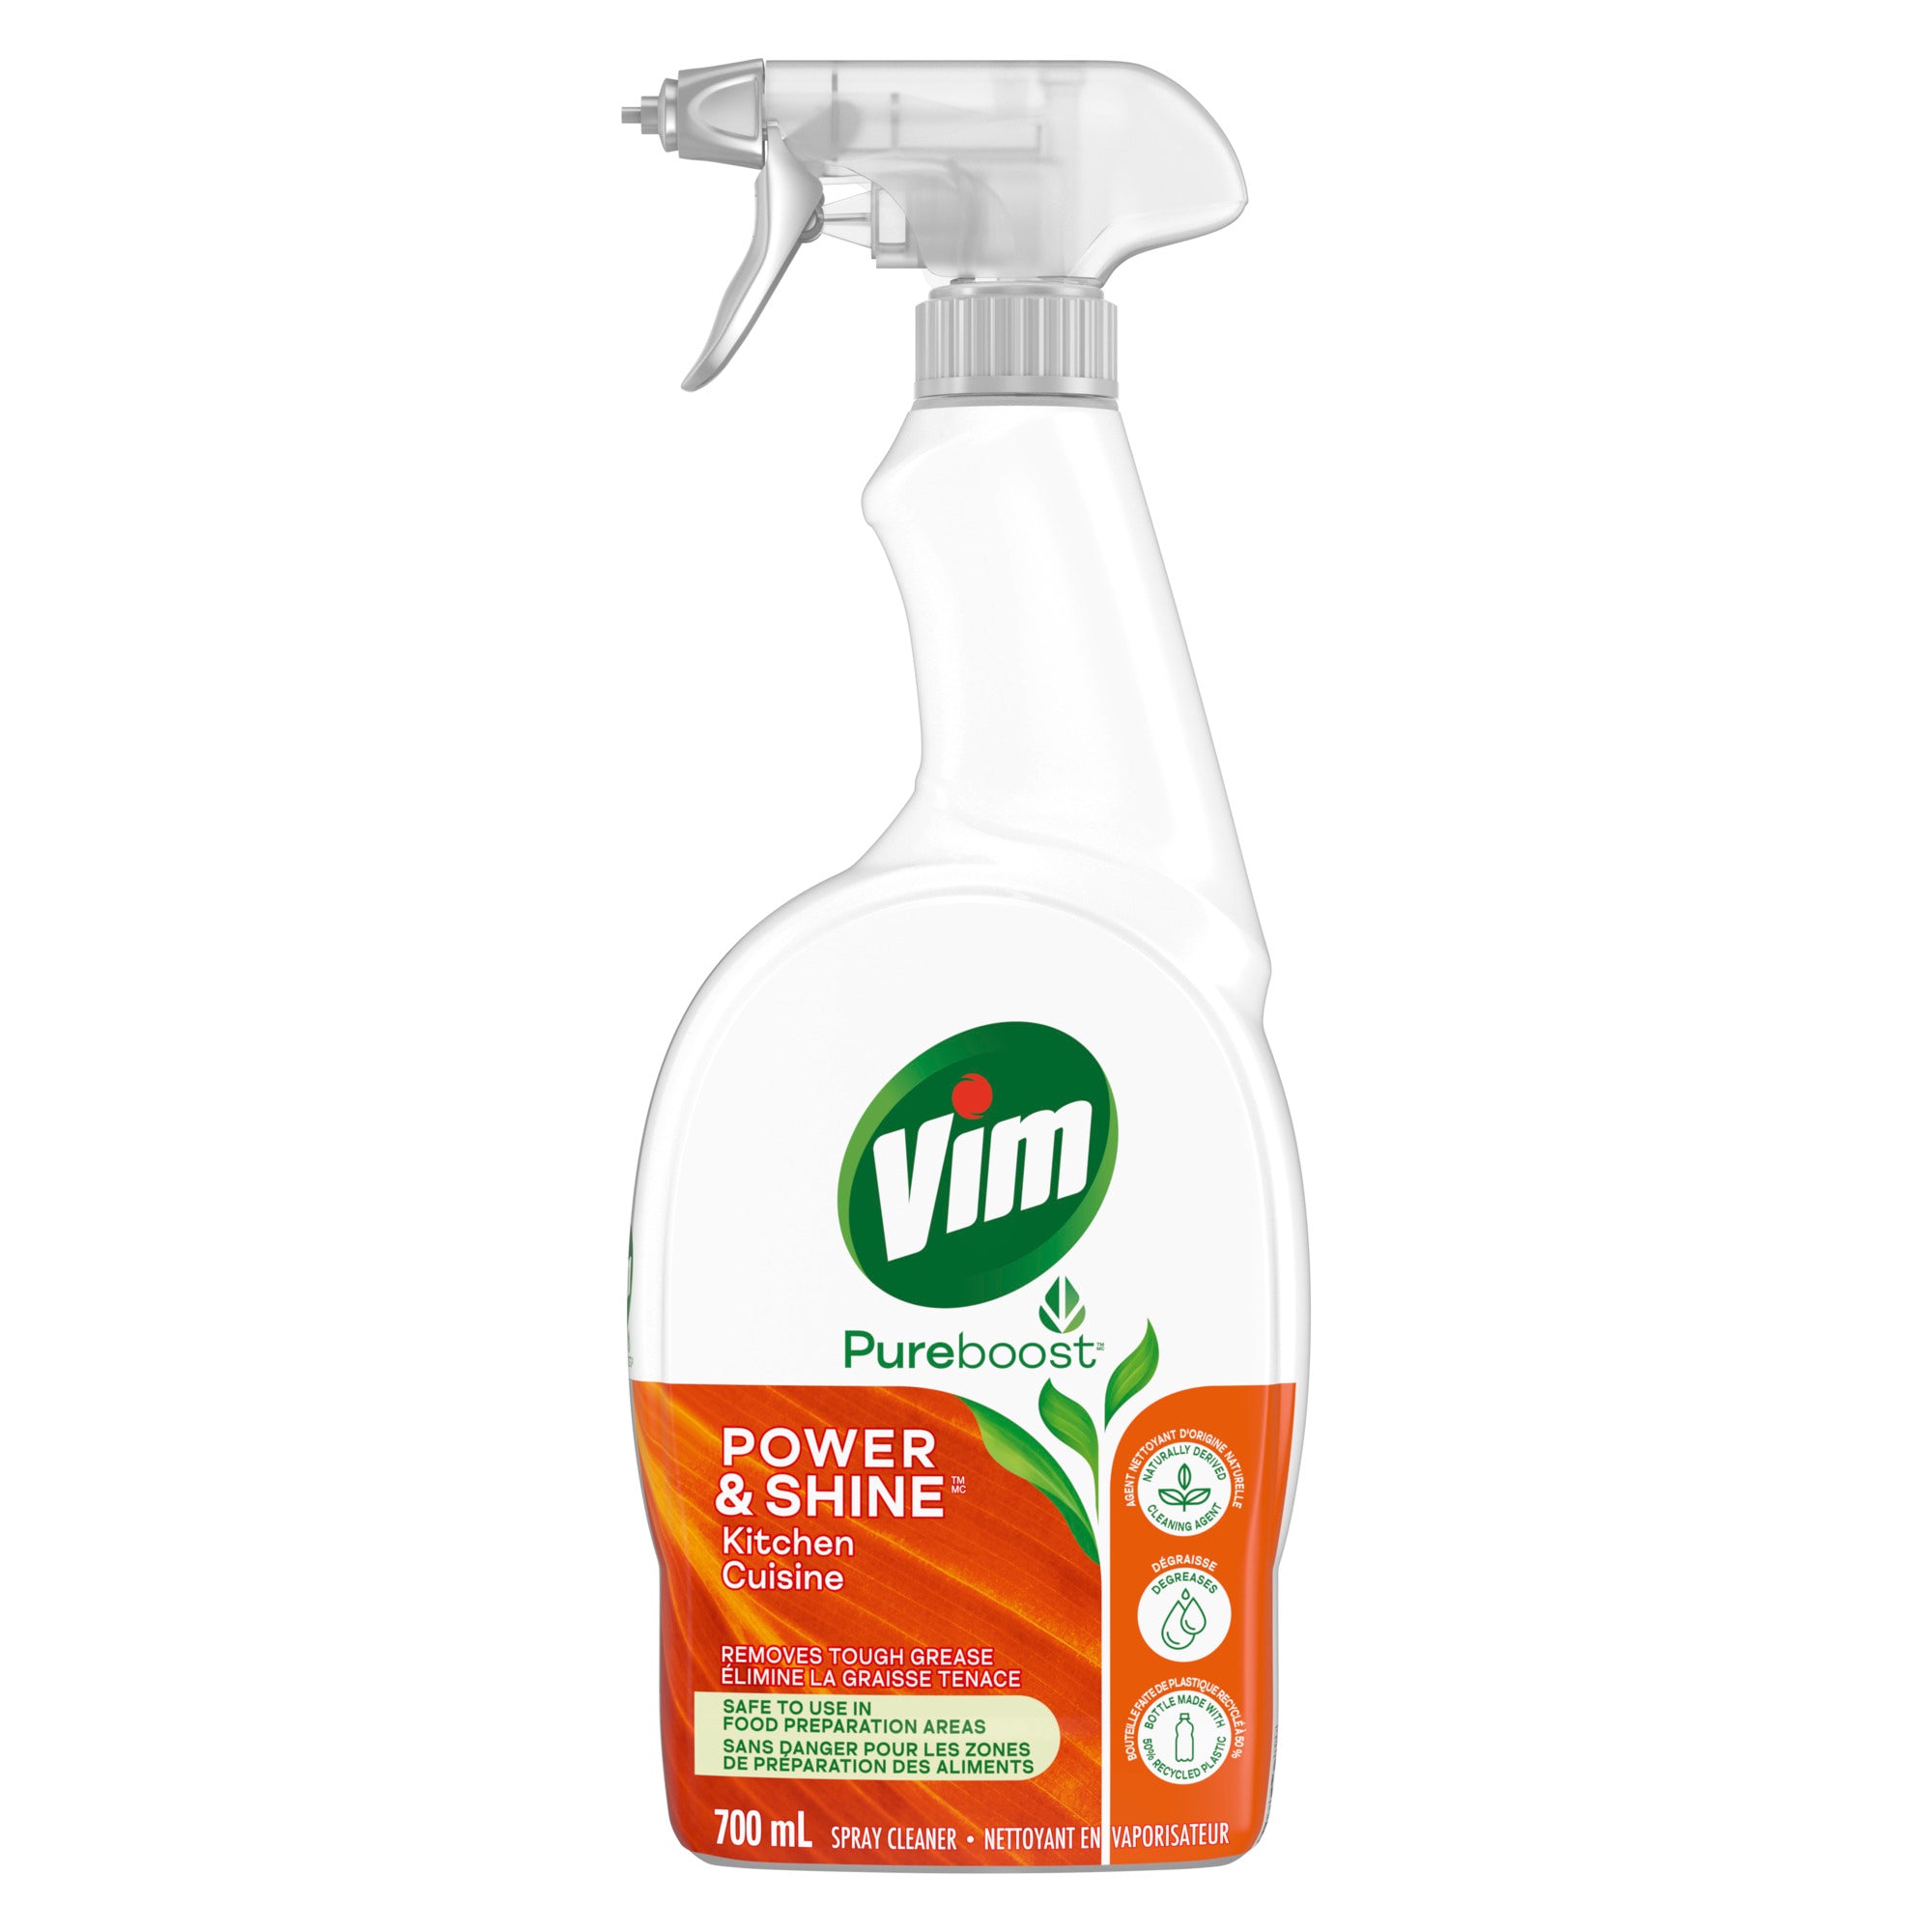 Showing the front angle view of the Vim Power & Shine Kitchen Spray Cleaner 700ml product.